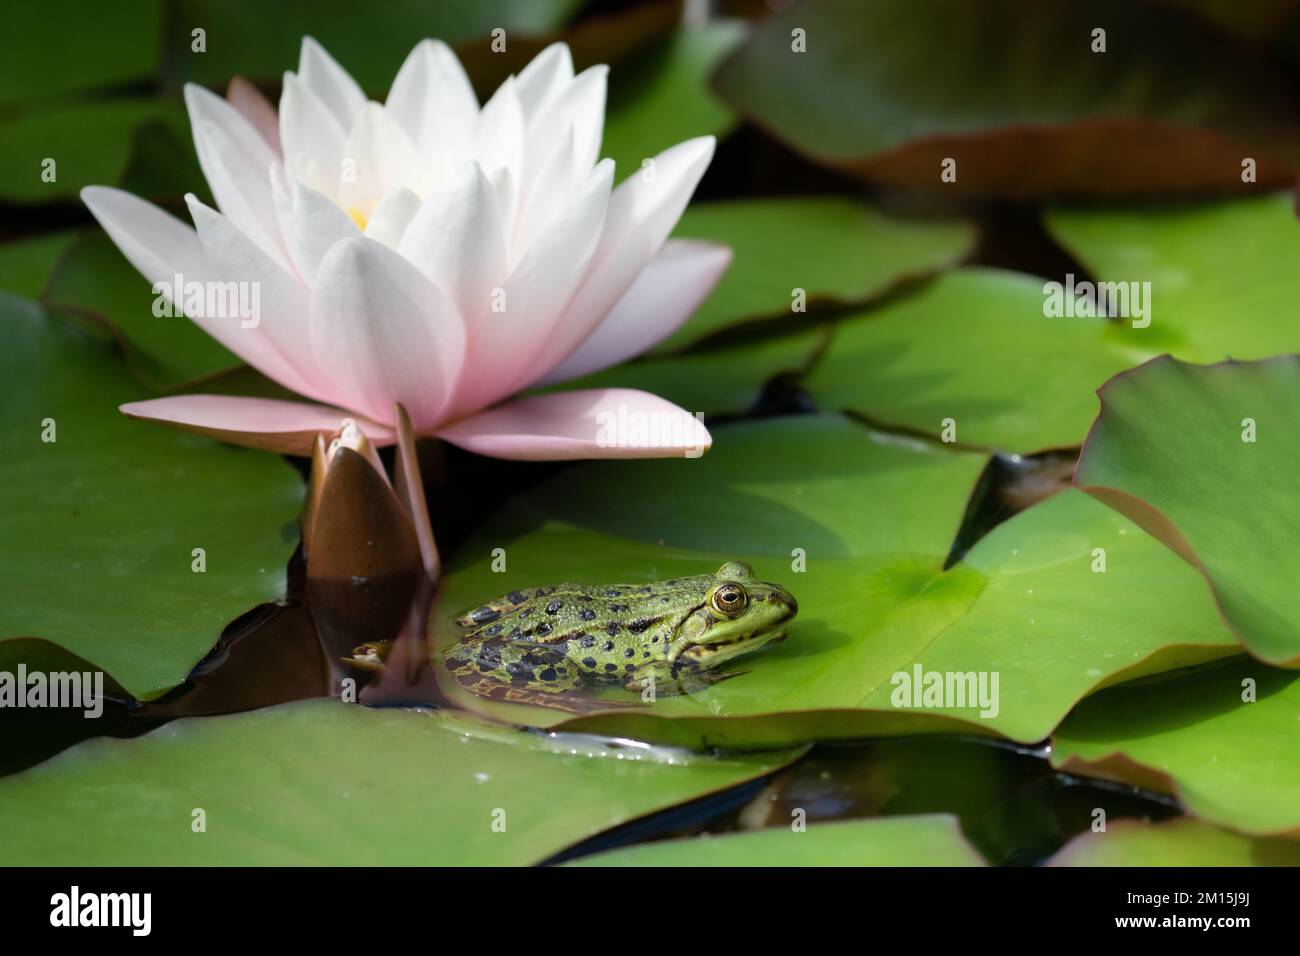 In a pond, a green frog sits on a lily pad in front of a water lily. Stock Photo